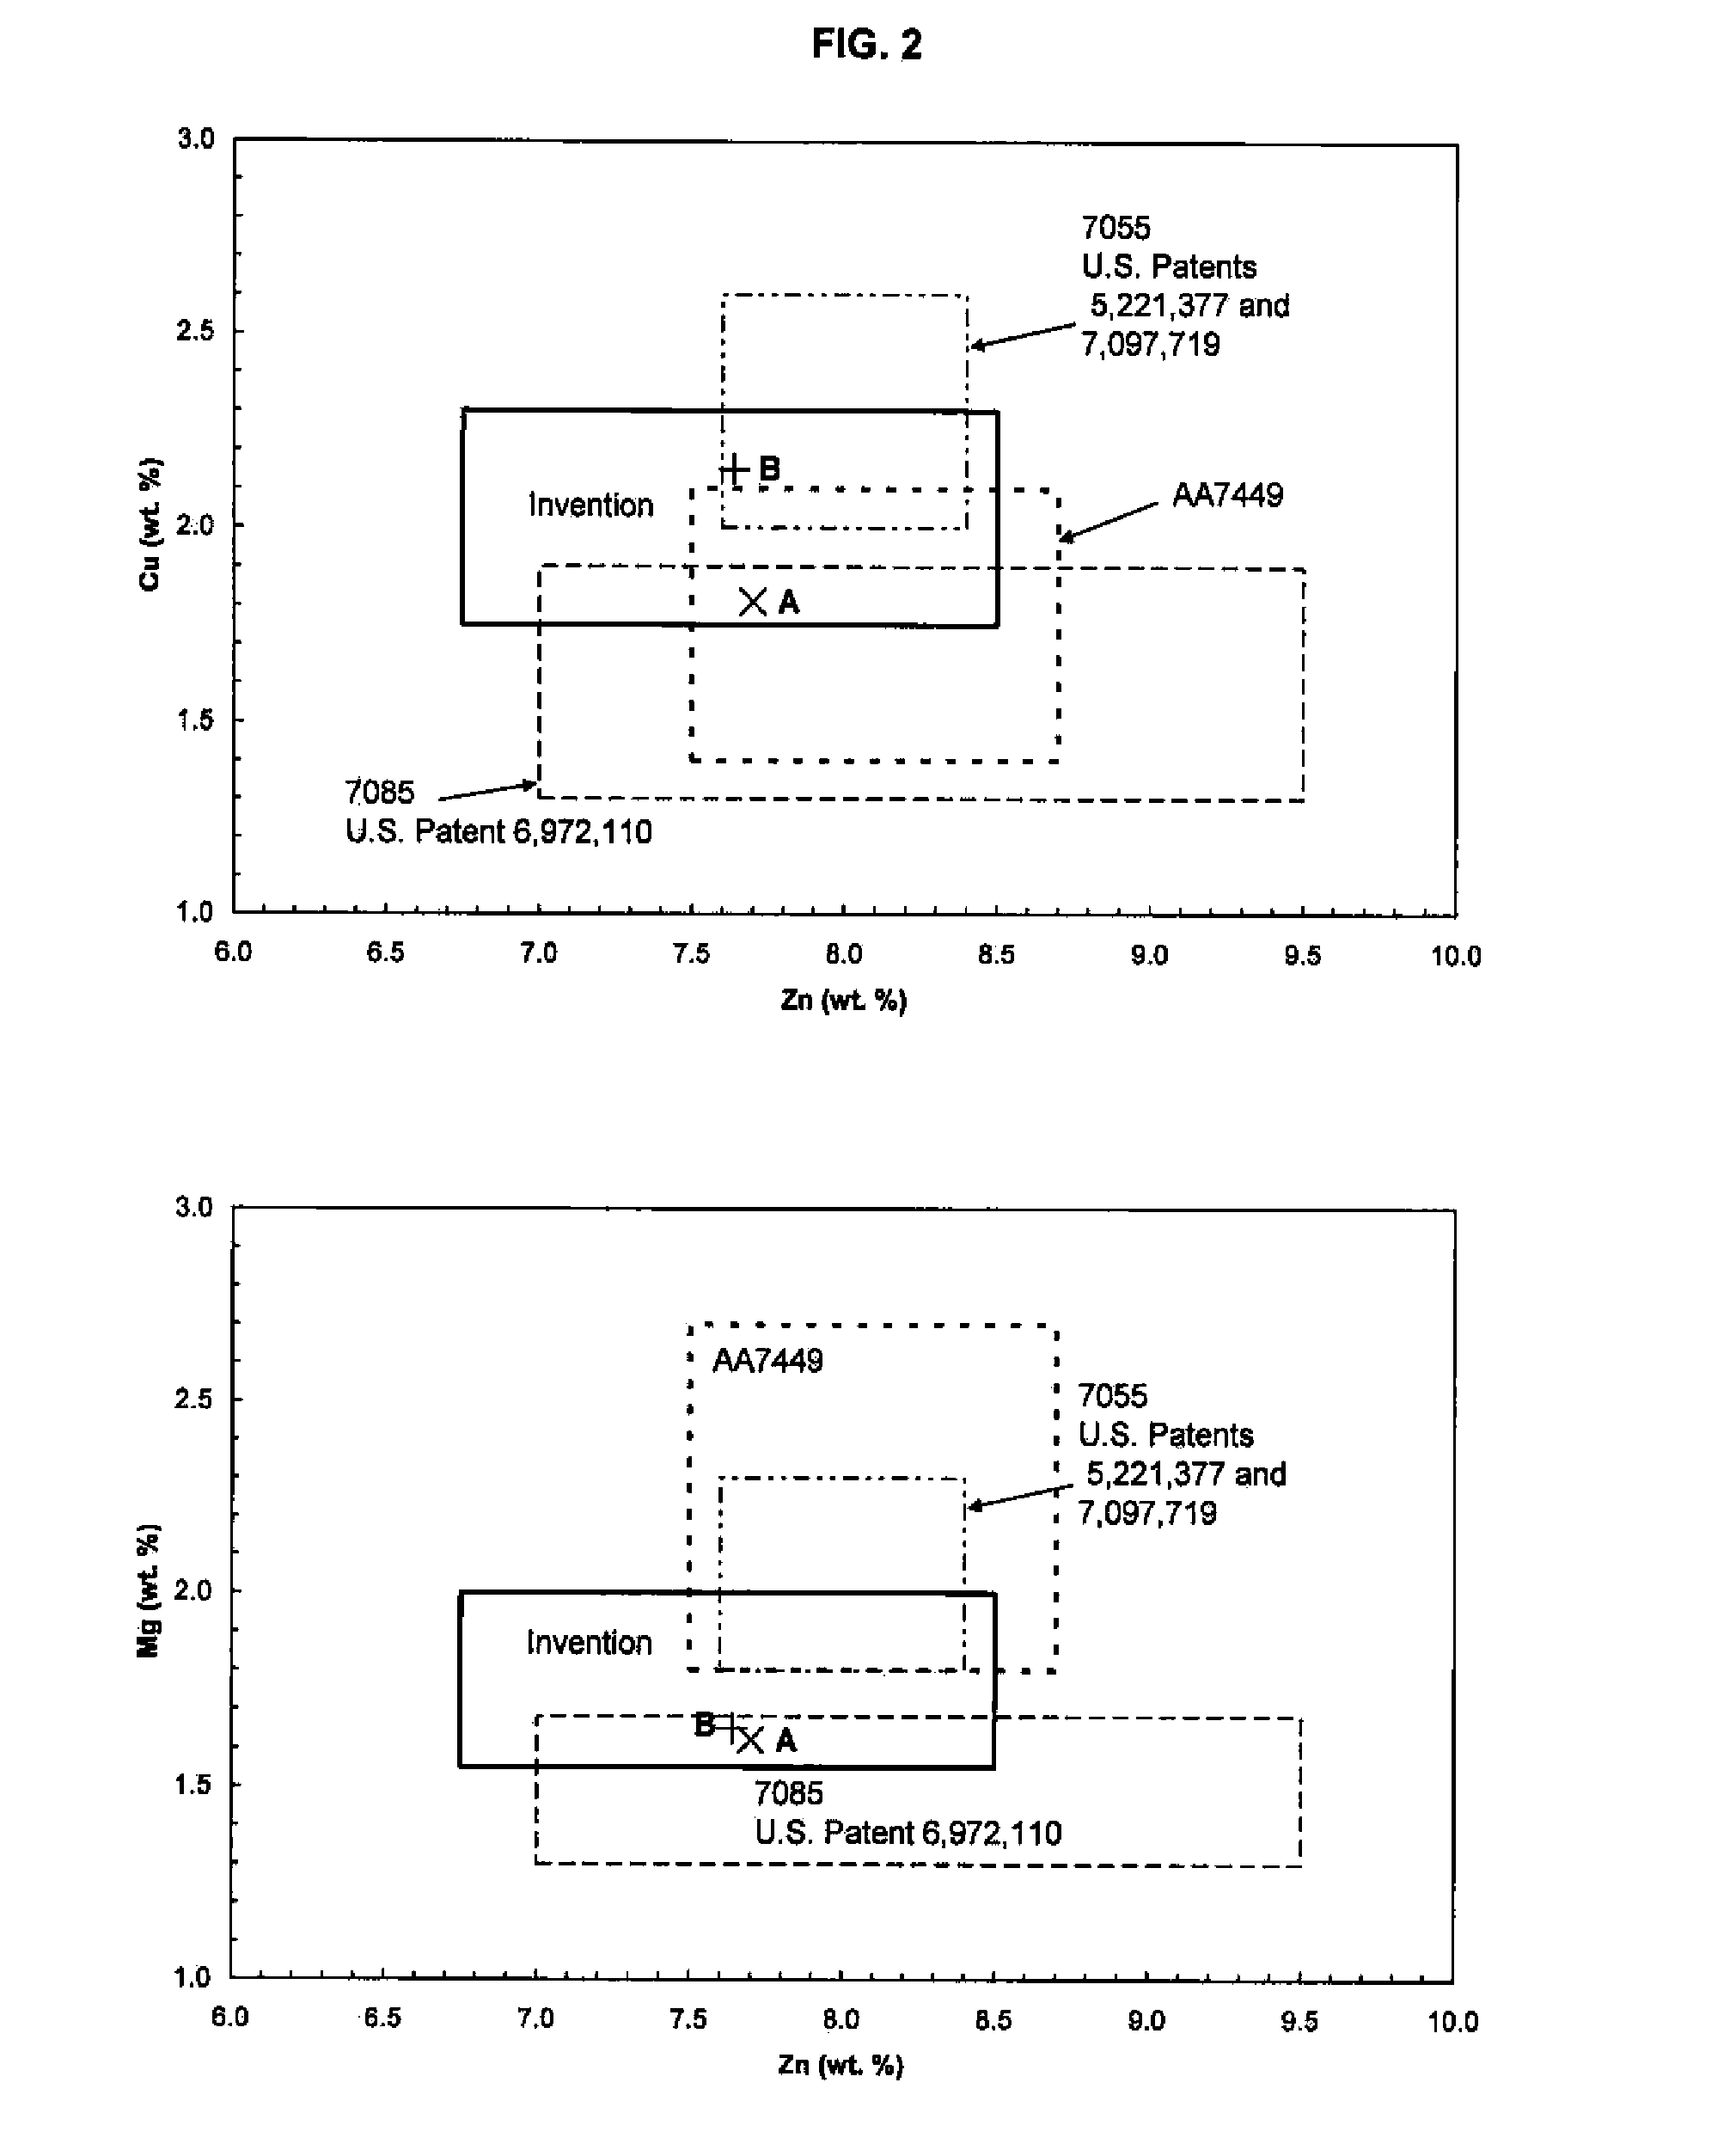 Aluminum Alloy Products Having Improved Property Combinations and Method for Artificially Aging Same